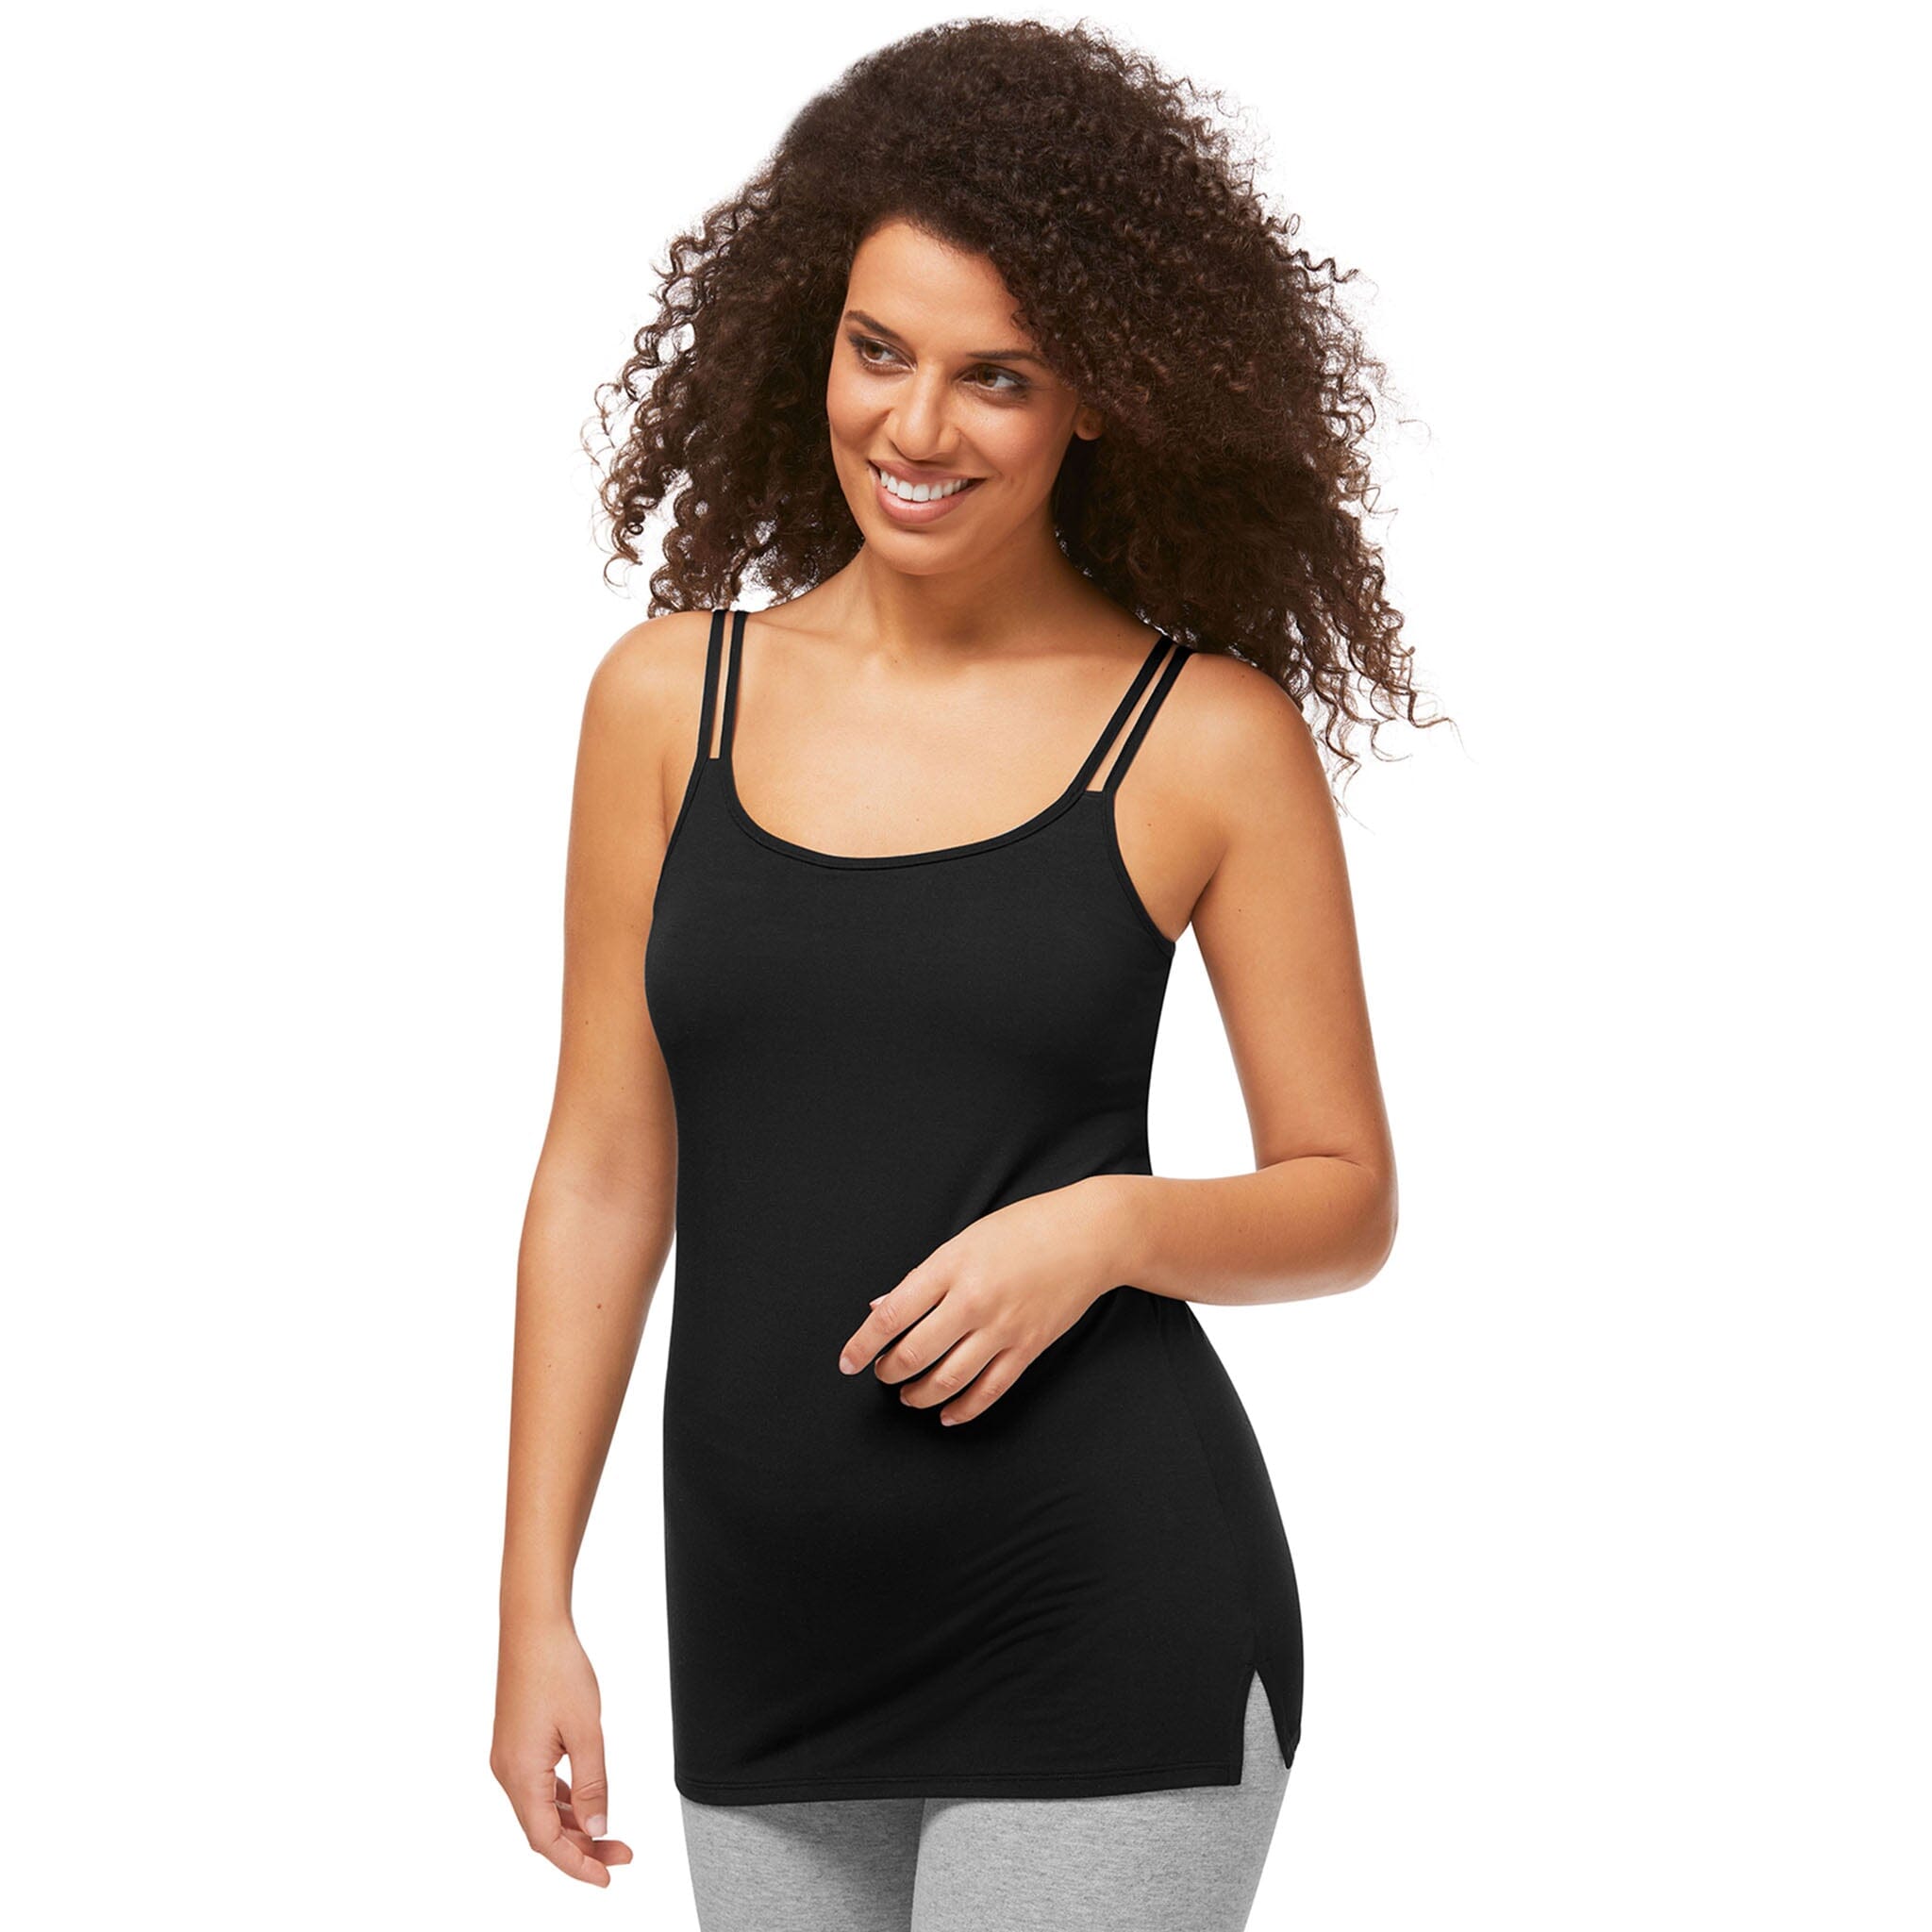 Amoena Valletta Tall Top with supportive built-in shelf bra